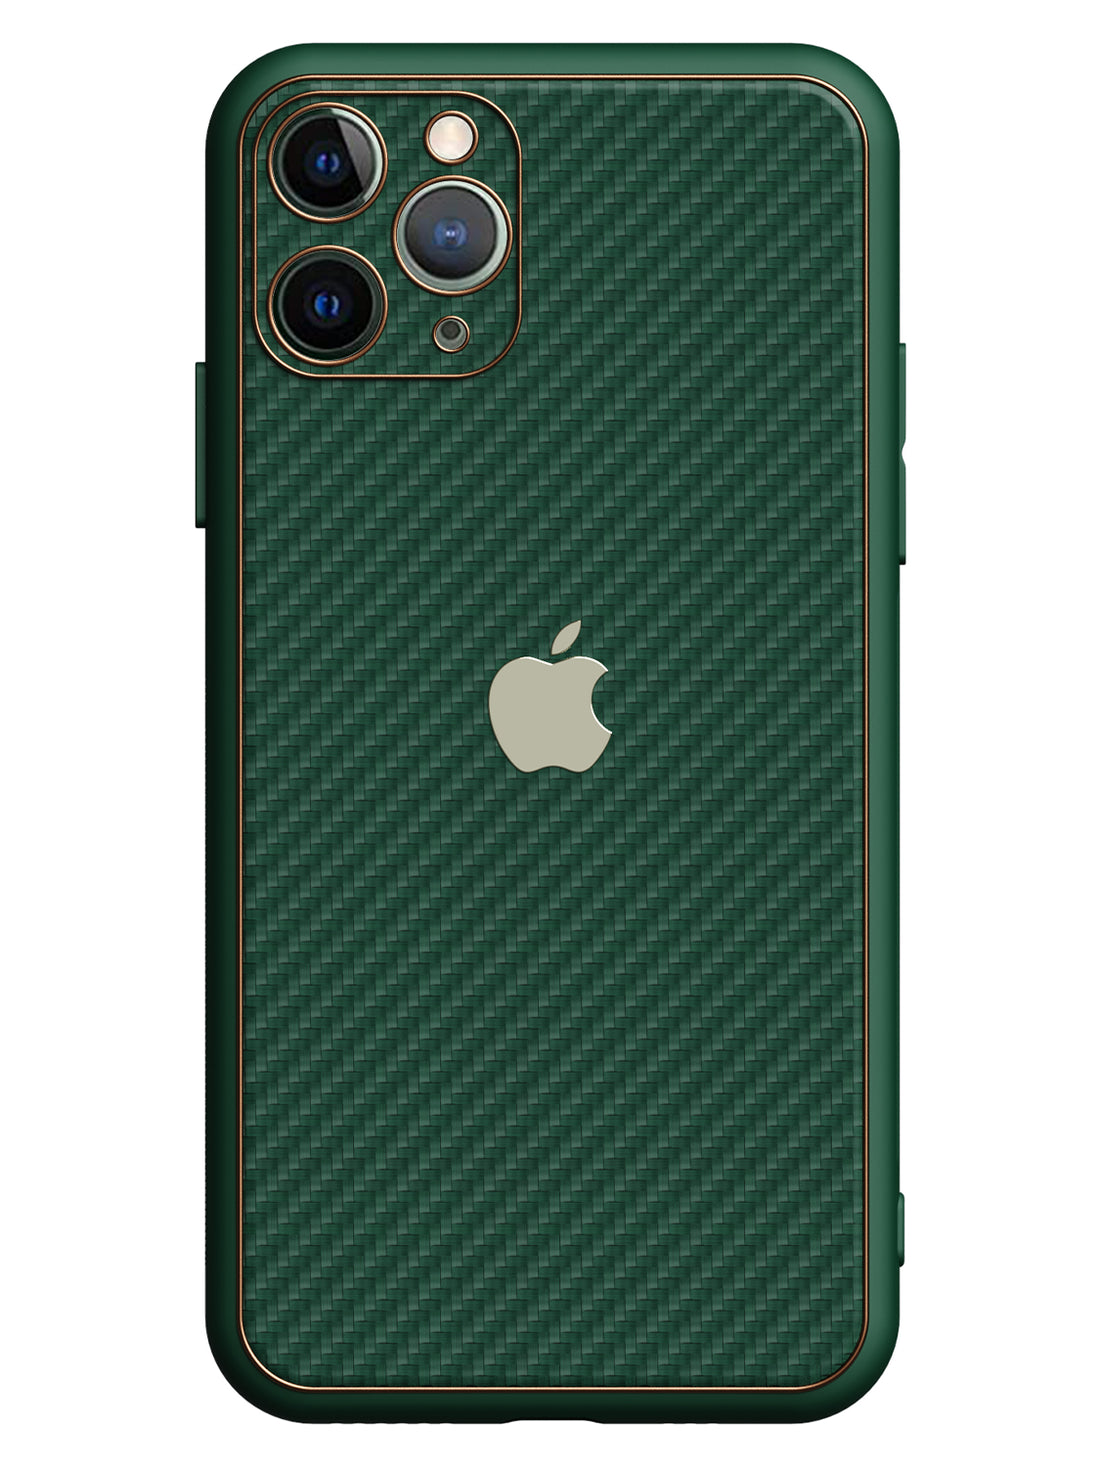 Carbon Leather Chrome Case - iPhone 11 Pro (Green)